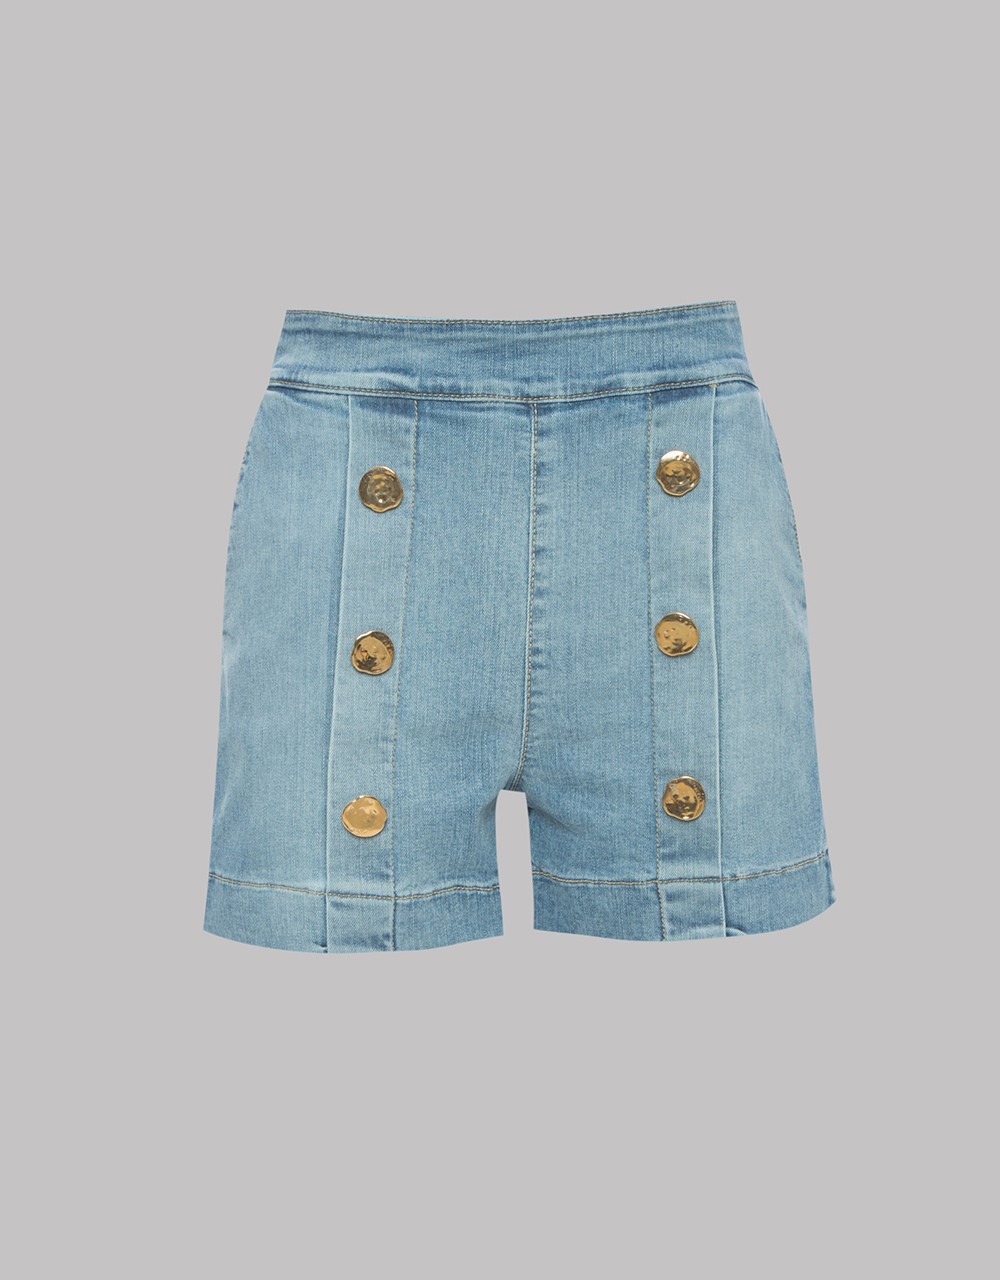 Denim shorts with decorative buttons